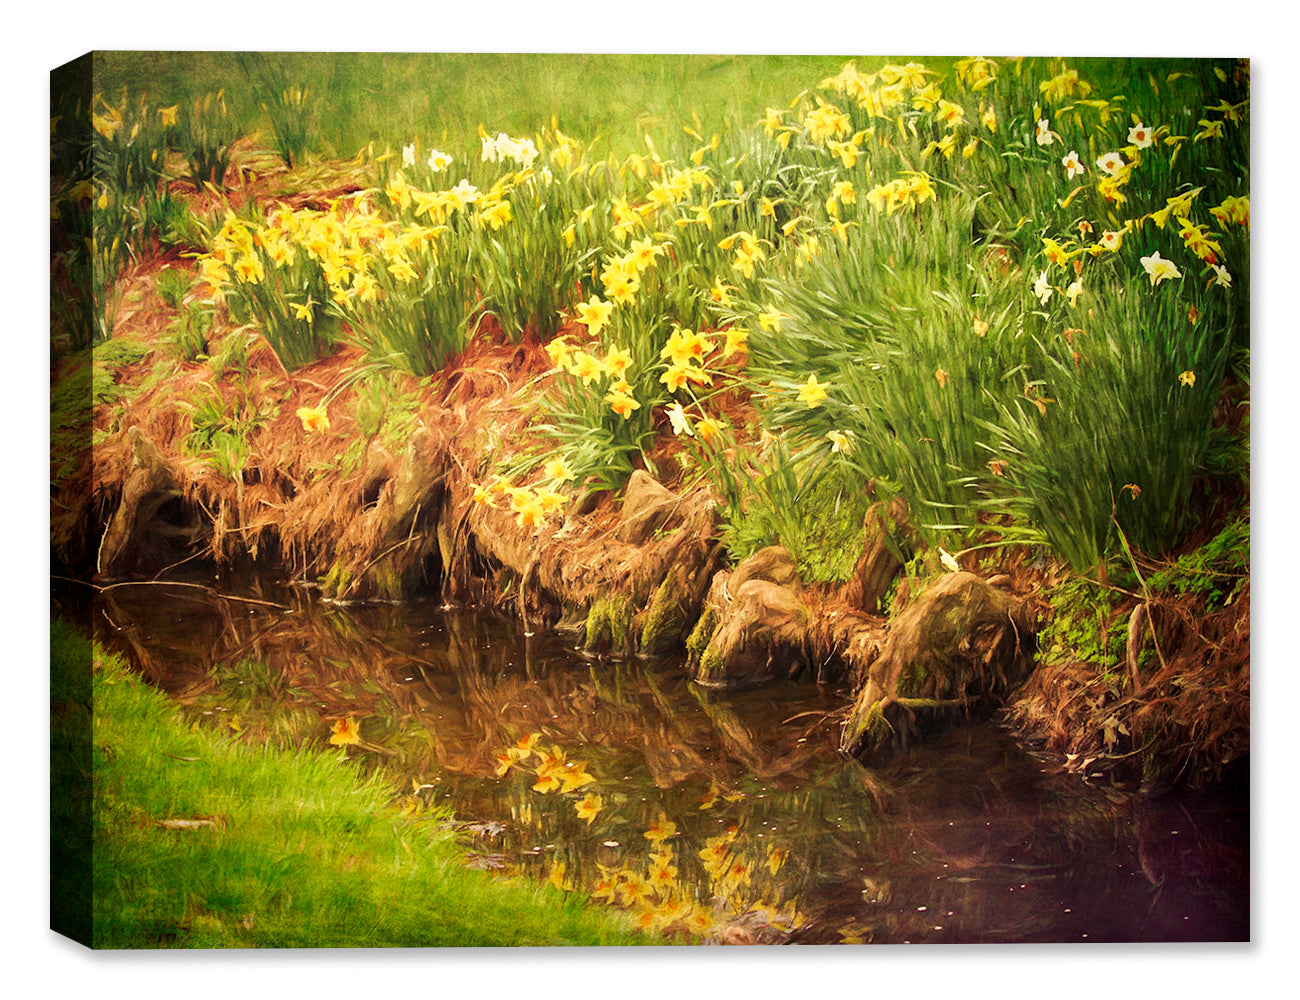 Daffodils - Reflections on Water